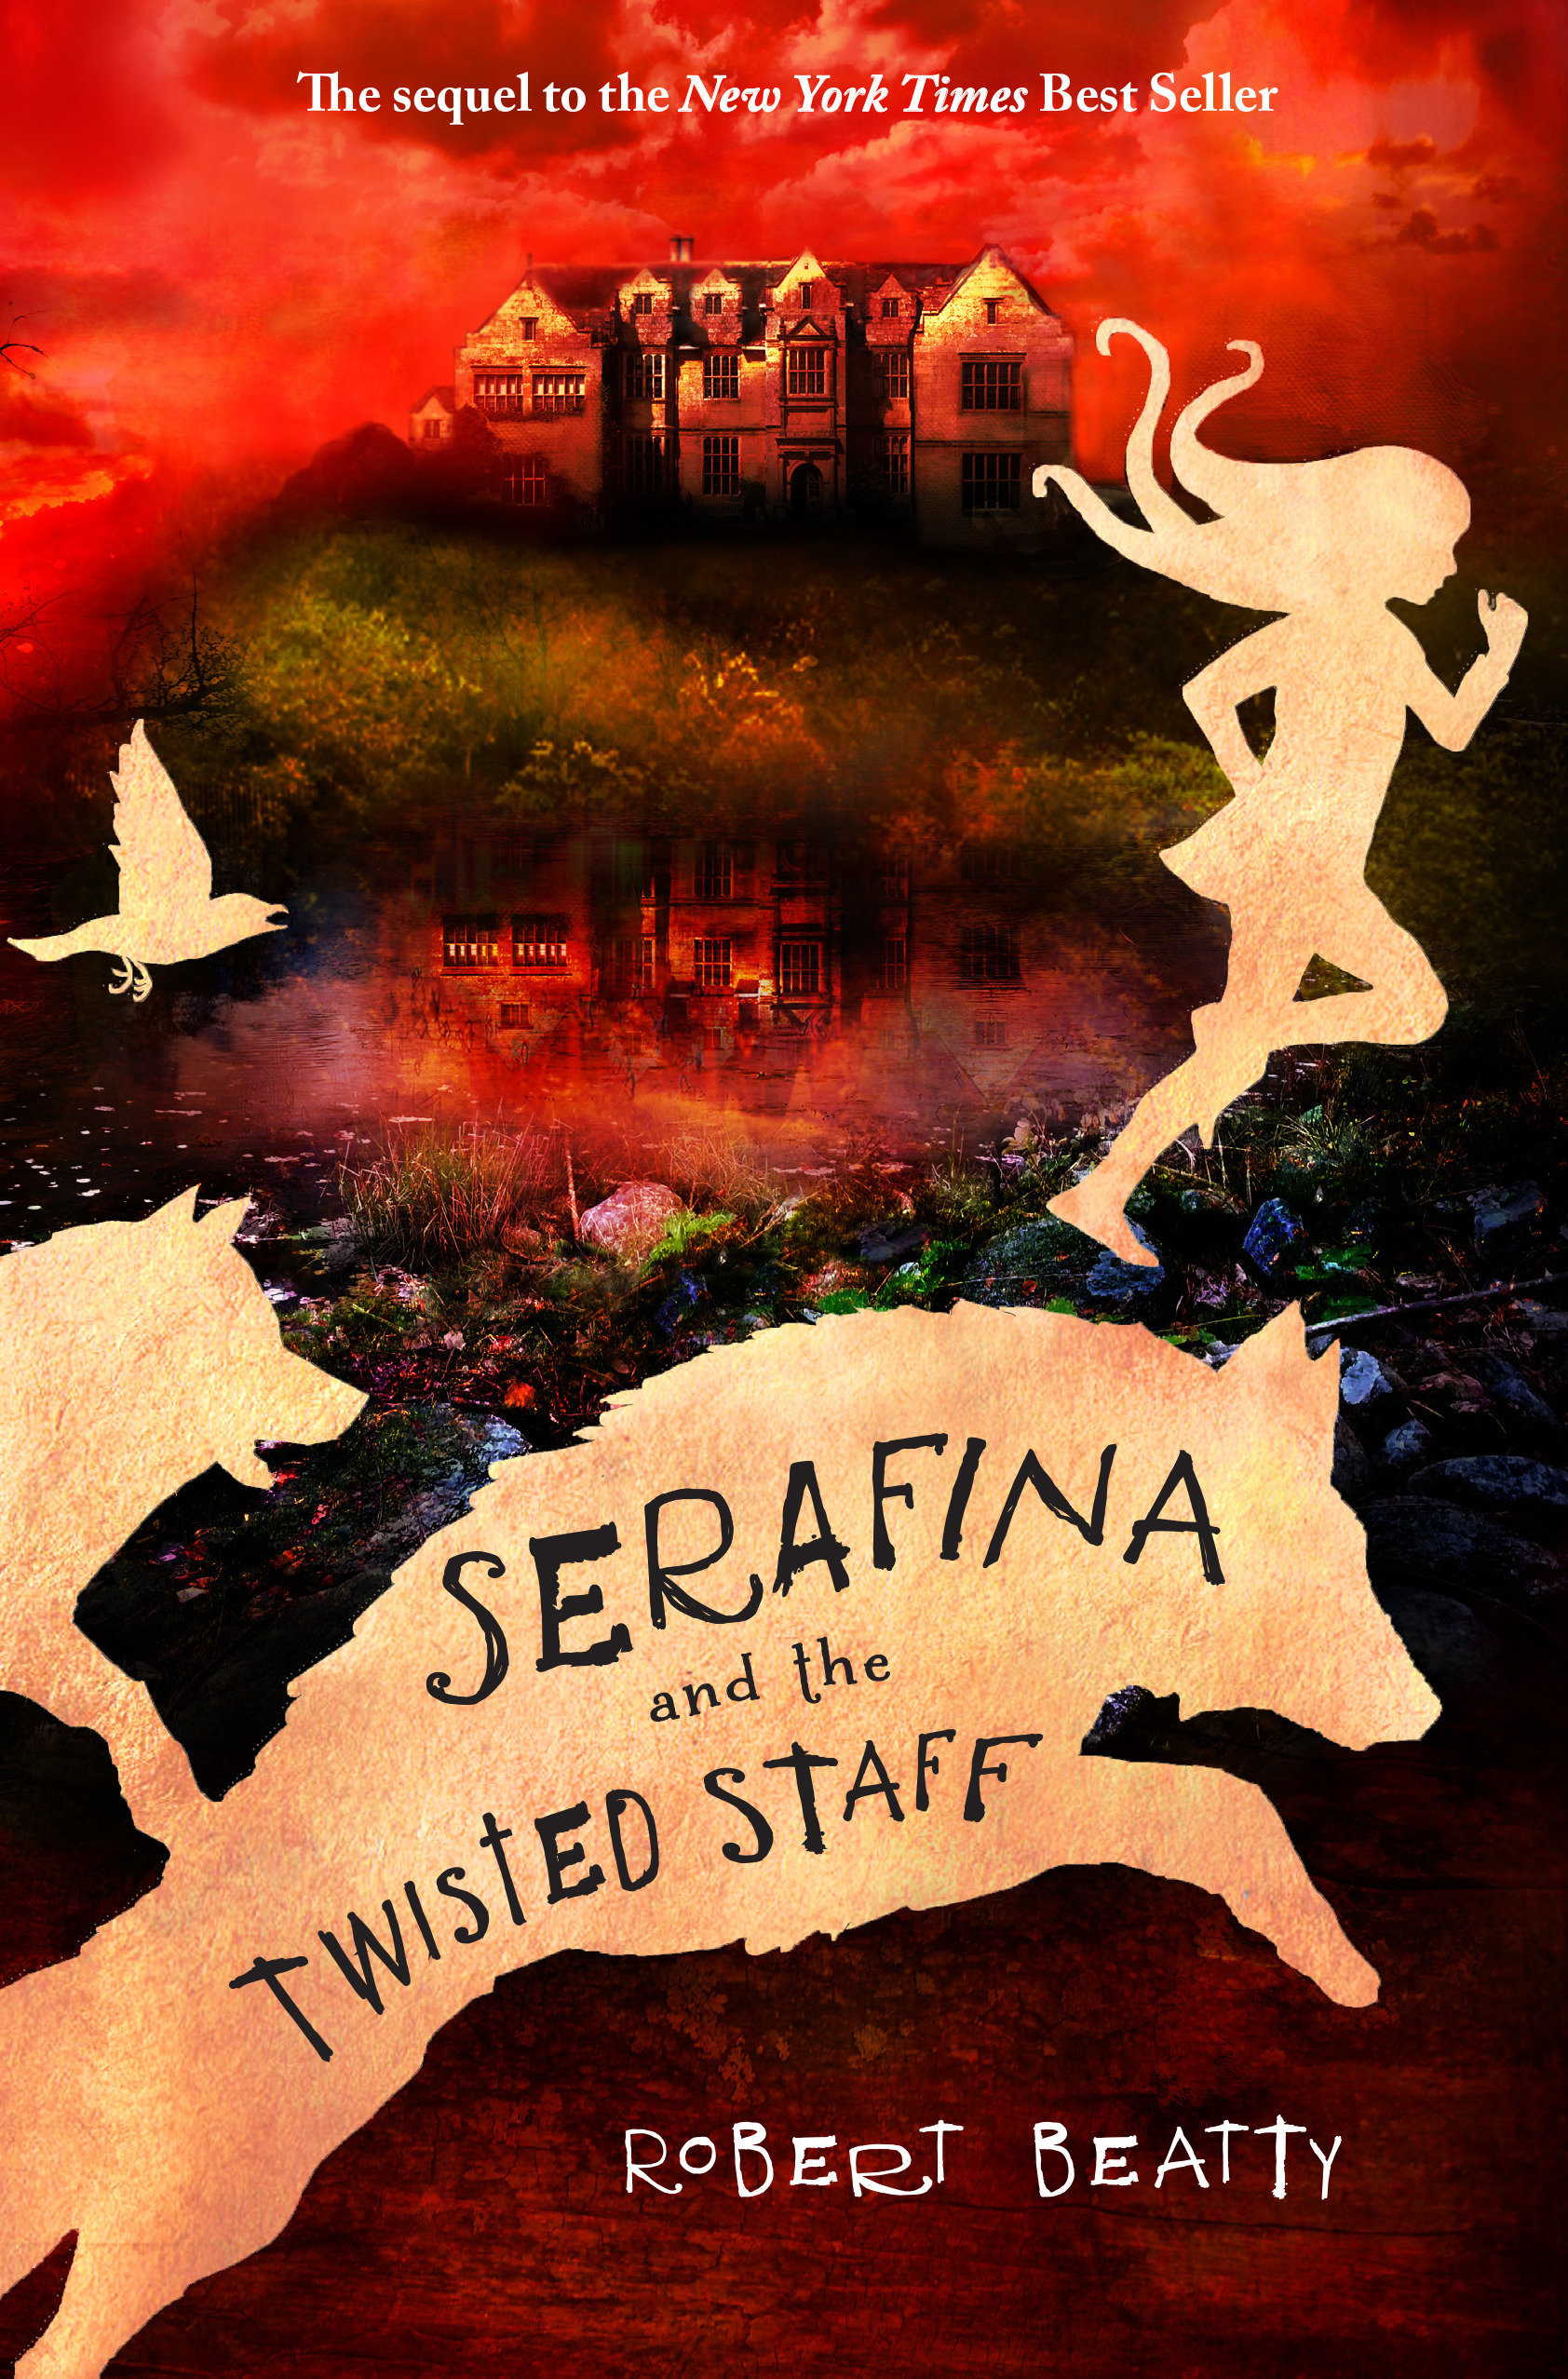 Serafina and the Twisted Staff-The Serafina Series Book 2 (Hardcover Book)